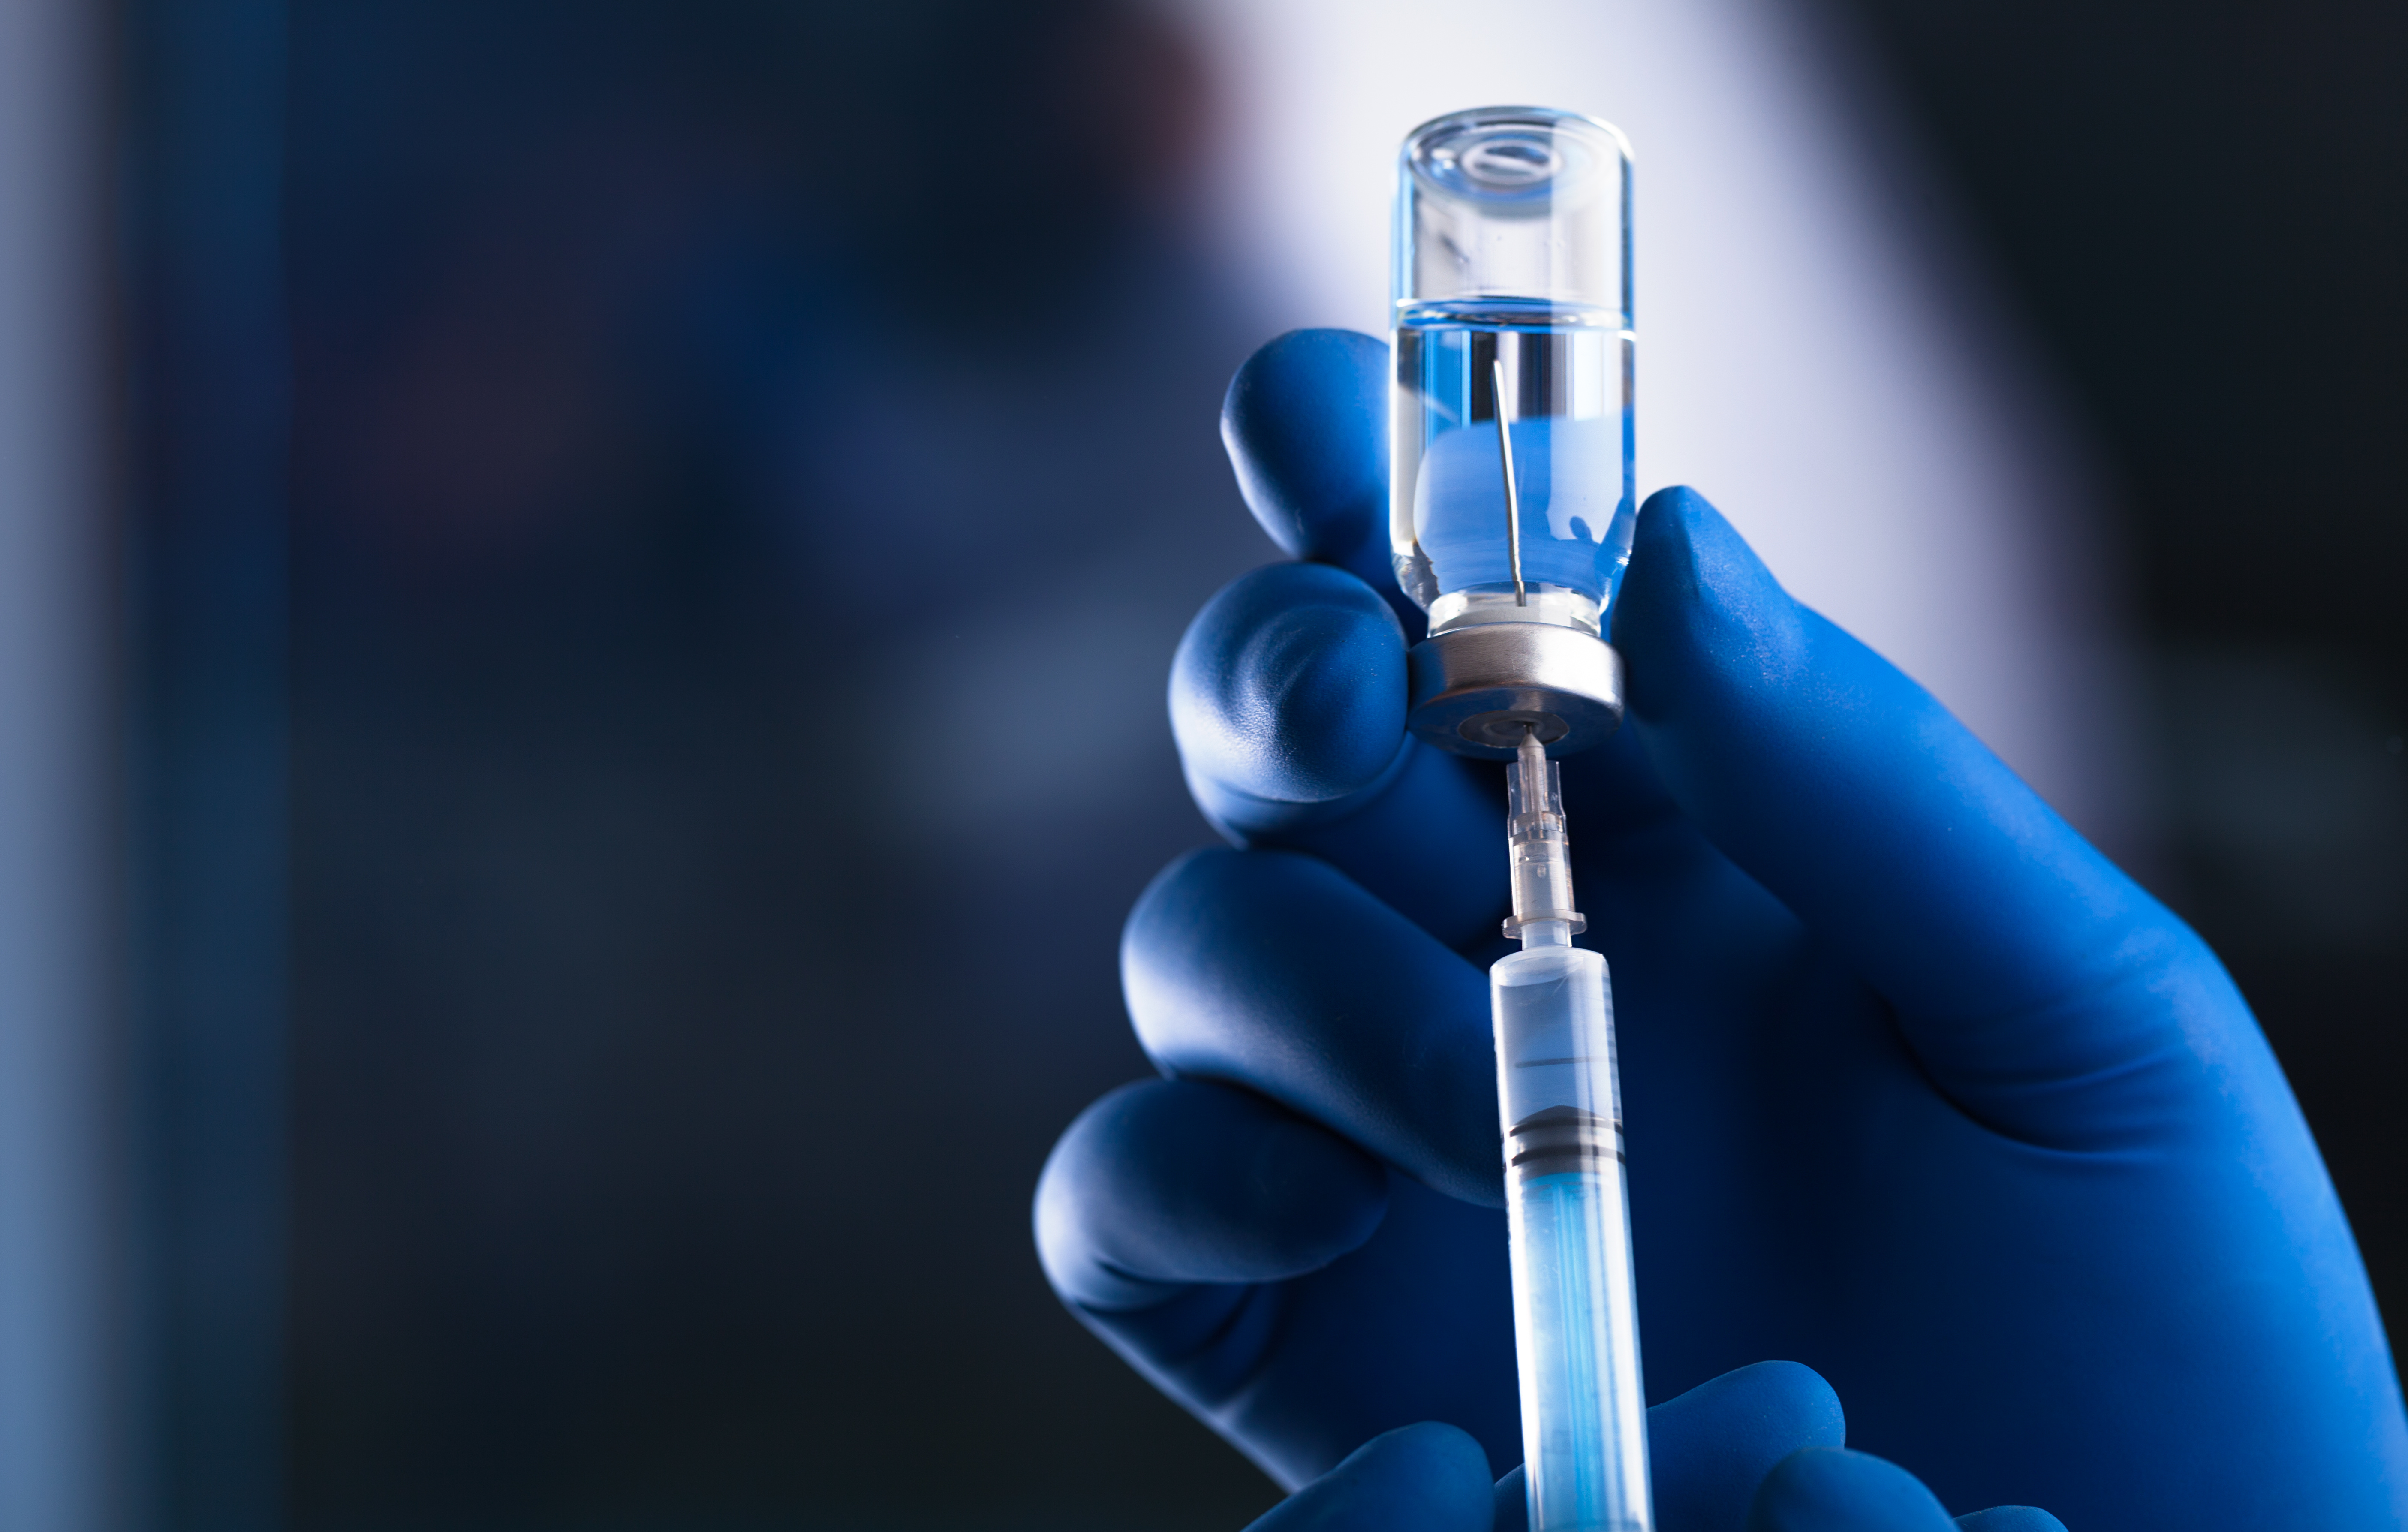 Image of a blue gloved hand holding a vaccine bottle and syringe.